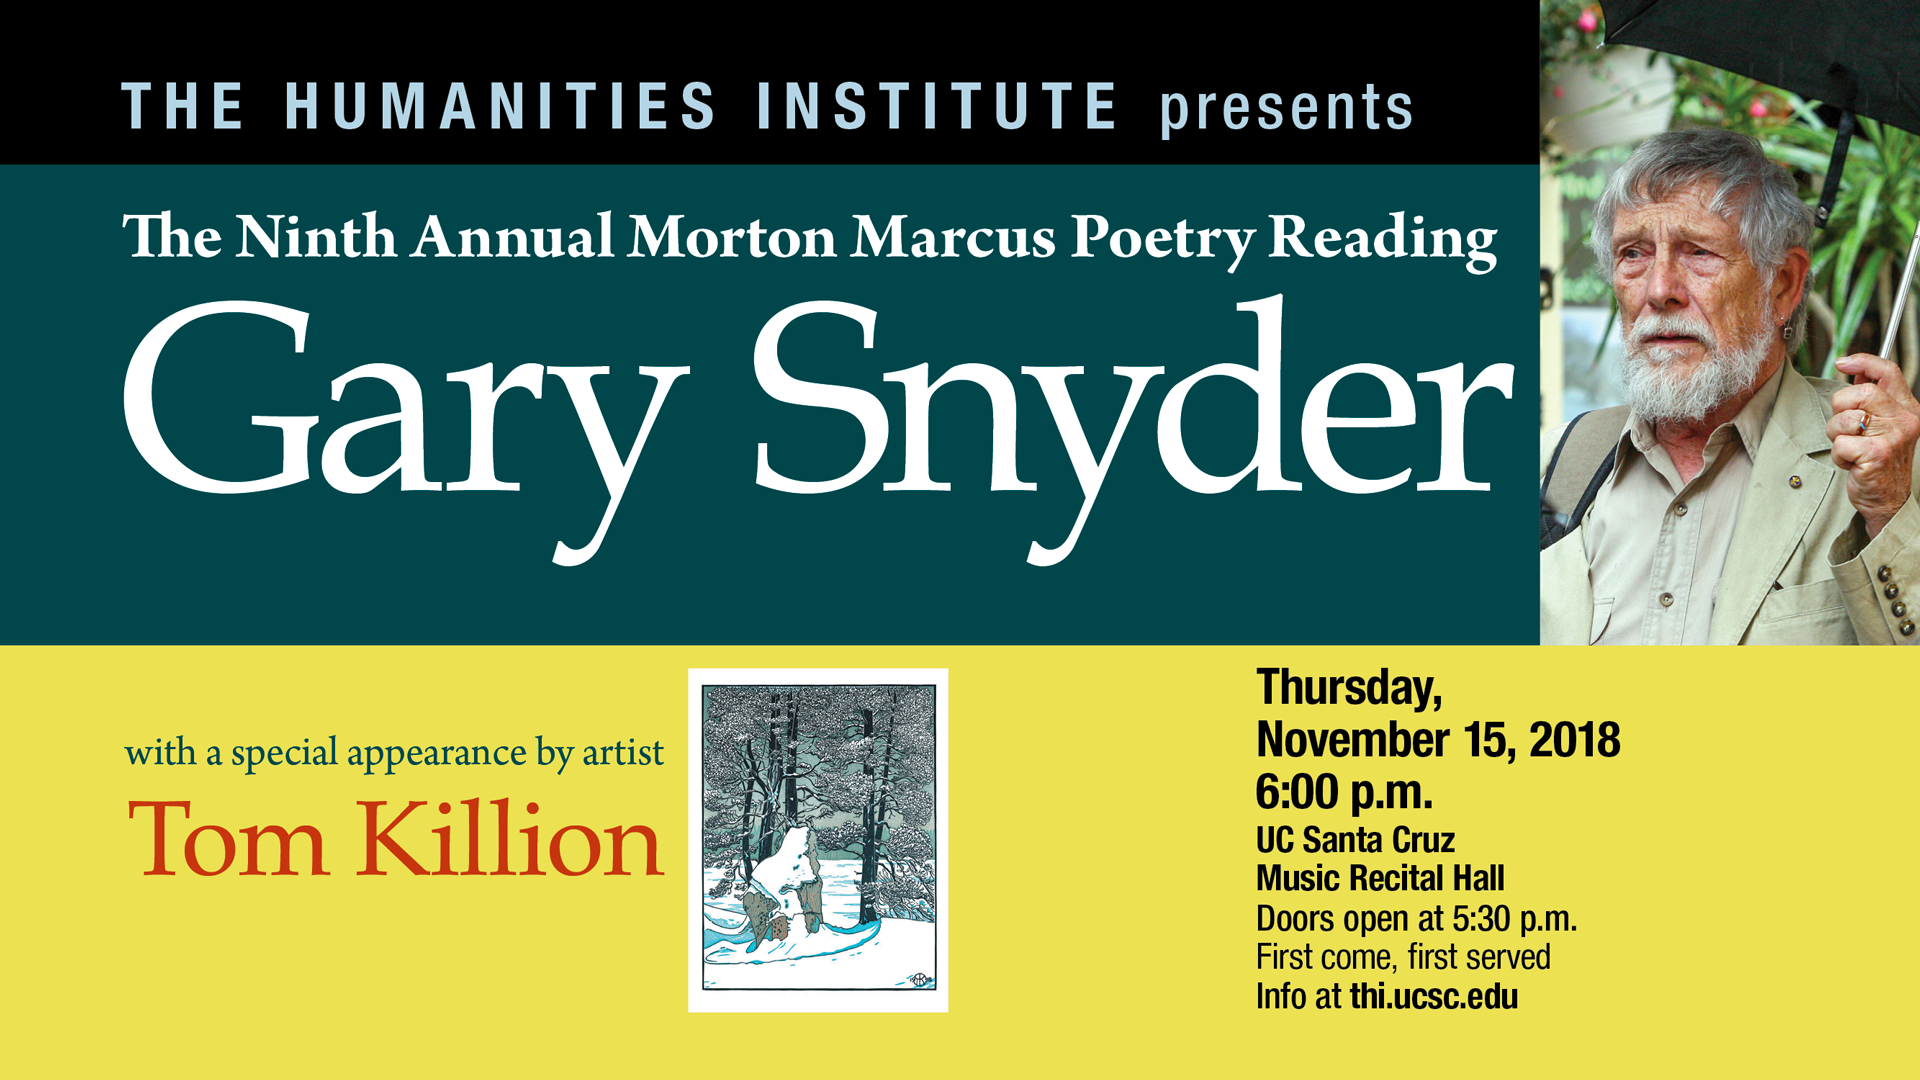 Morton Marcus Poetry event with Gary Snyder